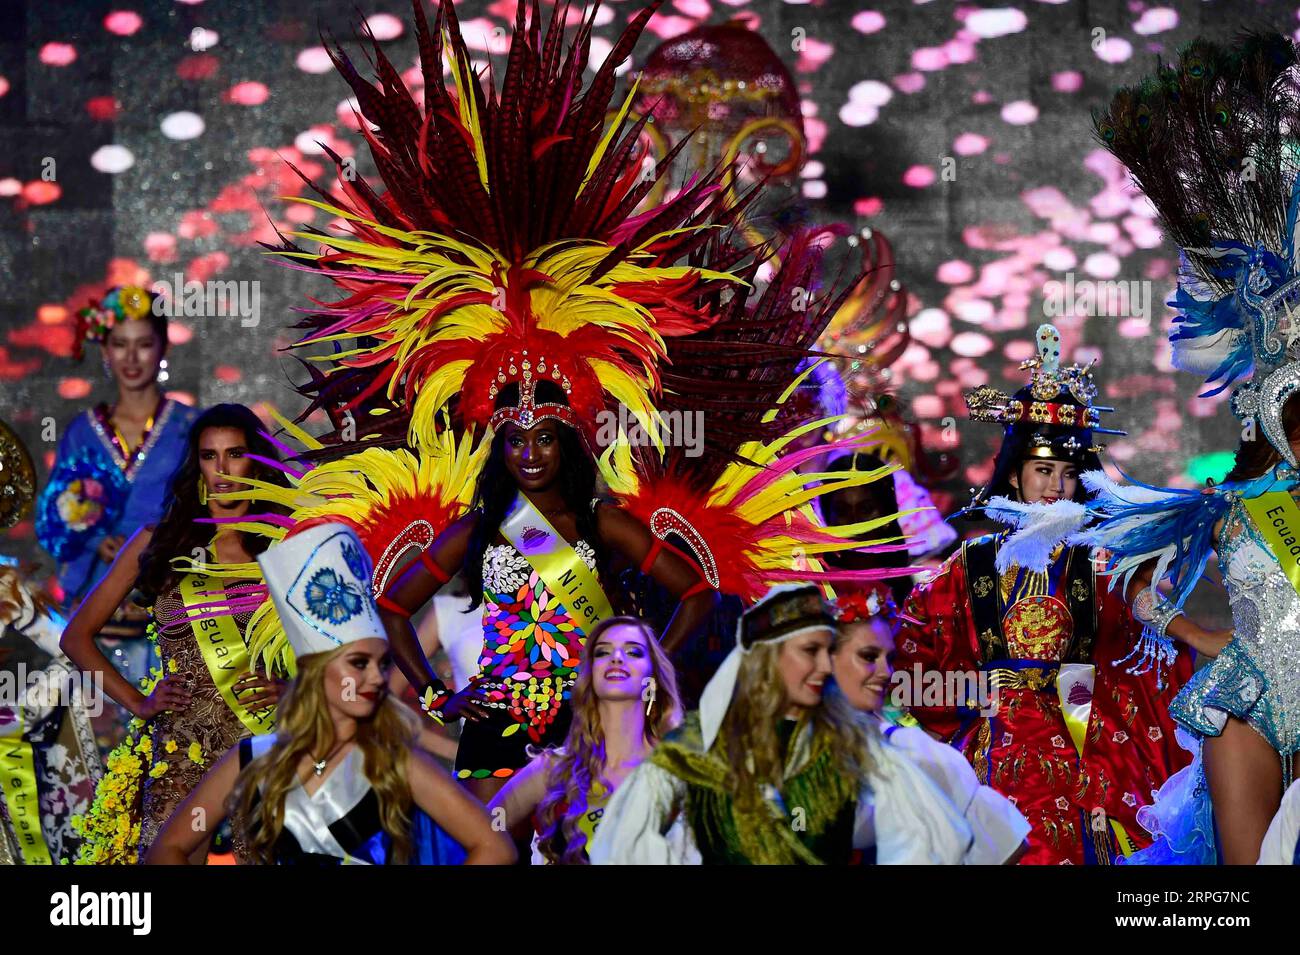 191007 -- QINGDAO, Oct. 7, 2019 -- Contestants showcase folk costume during the Miss Tourism World 2019 Global Finals in Qingdao, east China s Shandong Province, Oct. 6, 2019. The beauty pageant concluded Sunday in the coastal city Qingdao, in which Miss Tourism Mexico Michelle Hewitt Zapata won the championship, Svetlana Mamaeva from Canada won the first runner-up, and Tan Ruoyi from China won the second runner-up. Contestants from over 60 countries and regions, including the United States, Venezuela, France, Brazil, SCO Shanghai Cooperation Organization member states as well as BRI Belt and Stock Photo